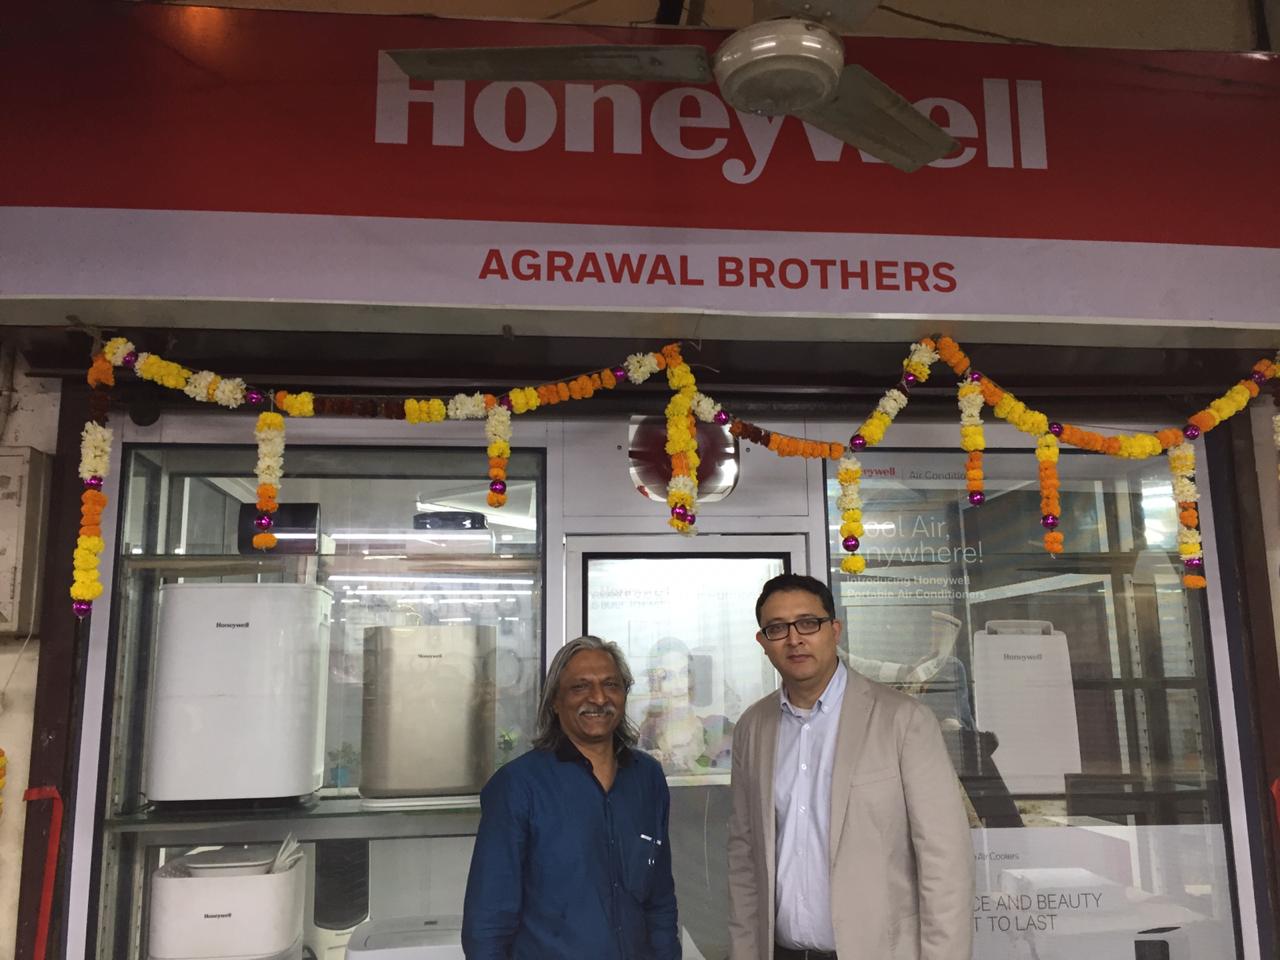 (L-R) Mr. Dinesh Agrawal -shop owner and Mr. Anupam Mathur, Sales Director, New Business – Connected Living Solutions, Honeywell Building Technologies, India